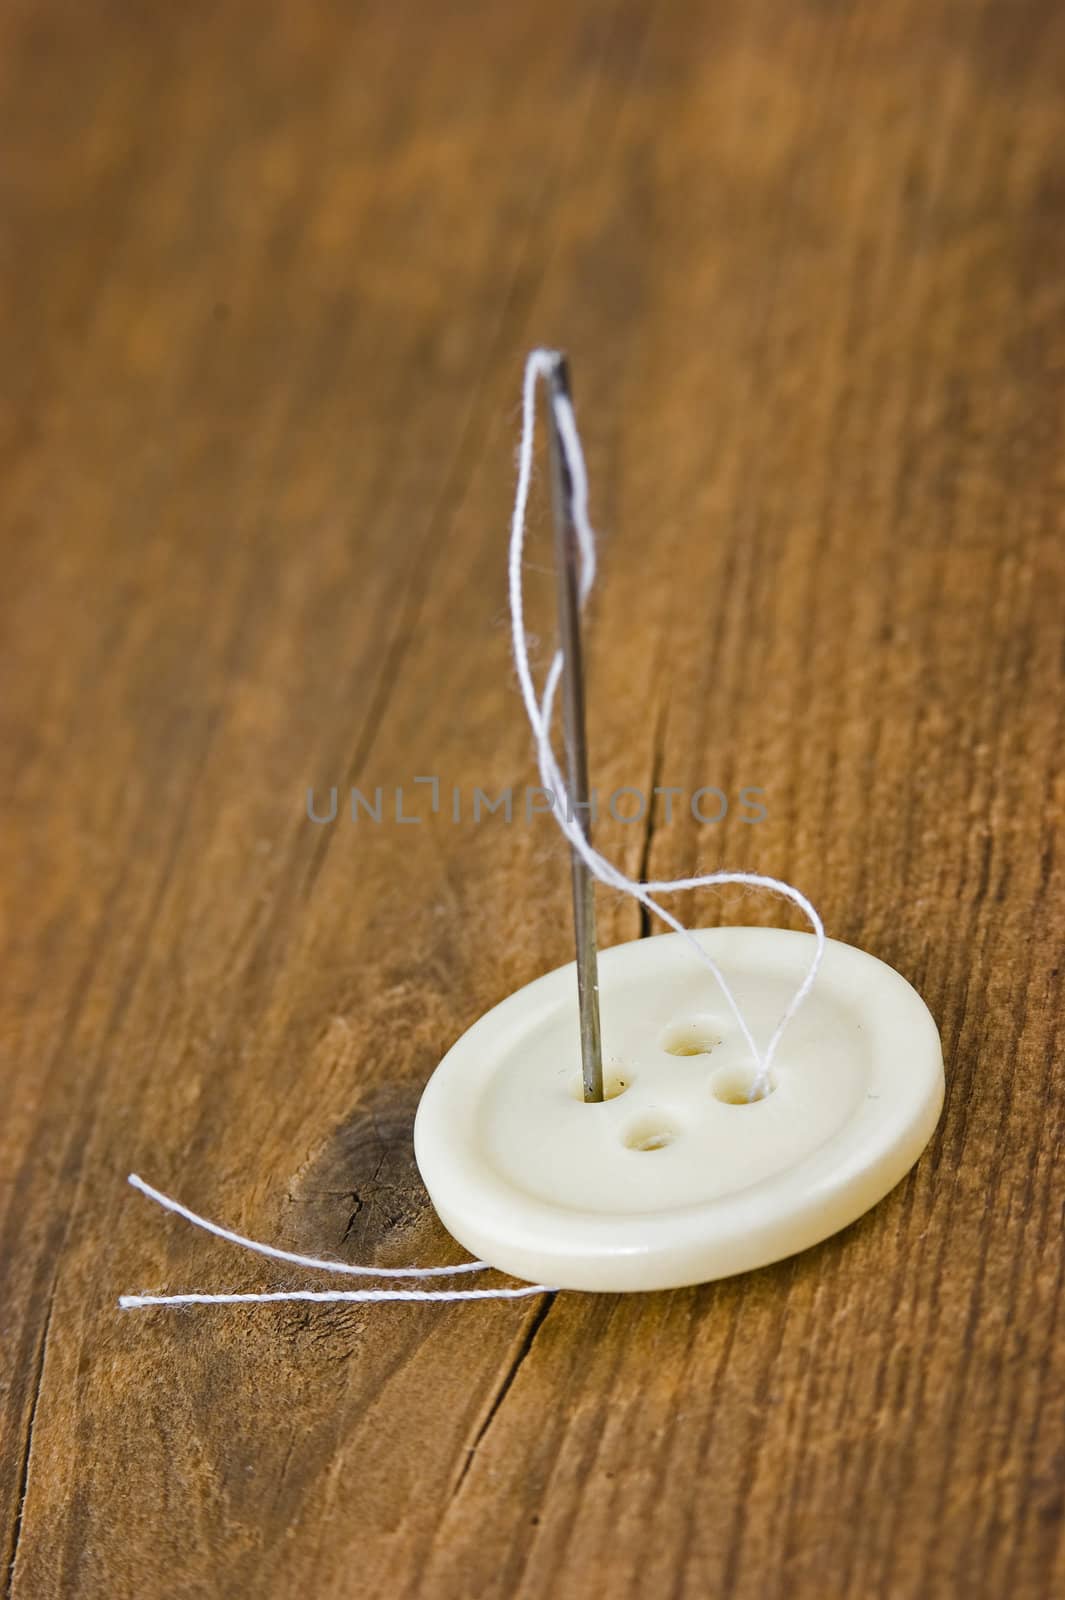 Buttons with needle and thread on the board